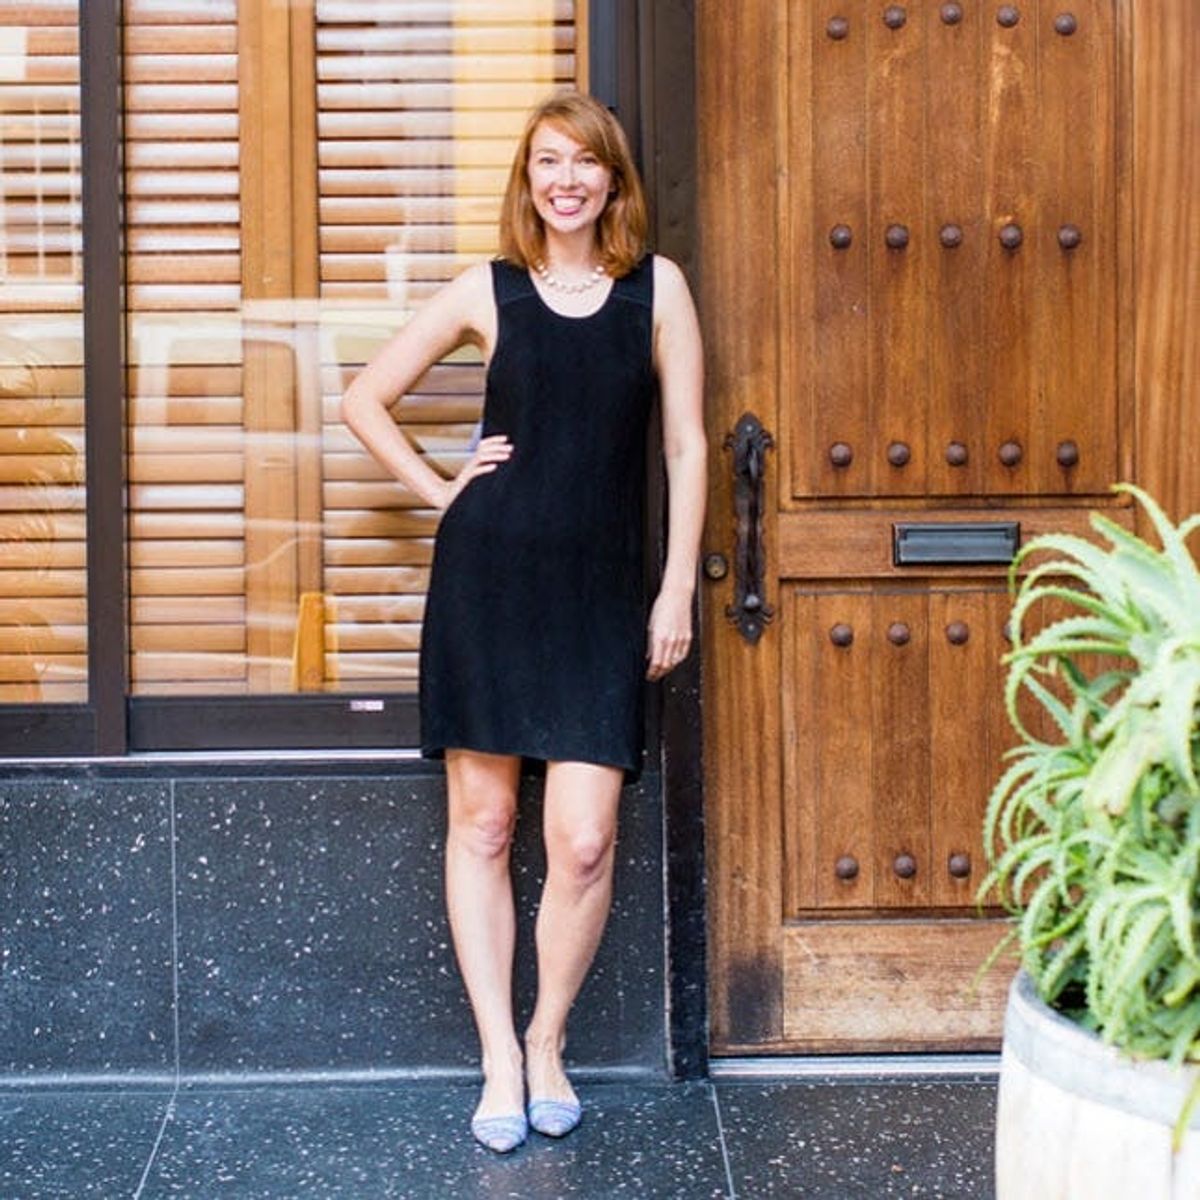 This New Fashion Kickstarter Is Creating a Black Darker Than Your Fave LBD